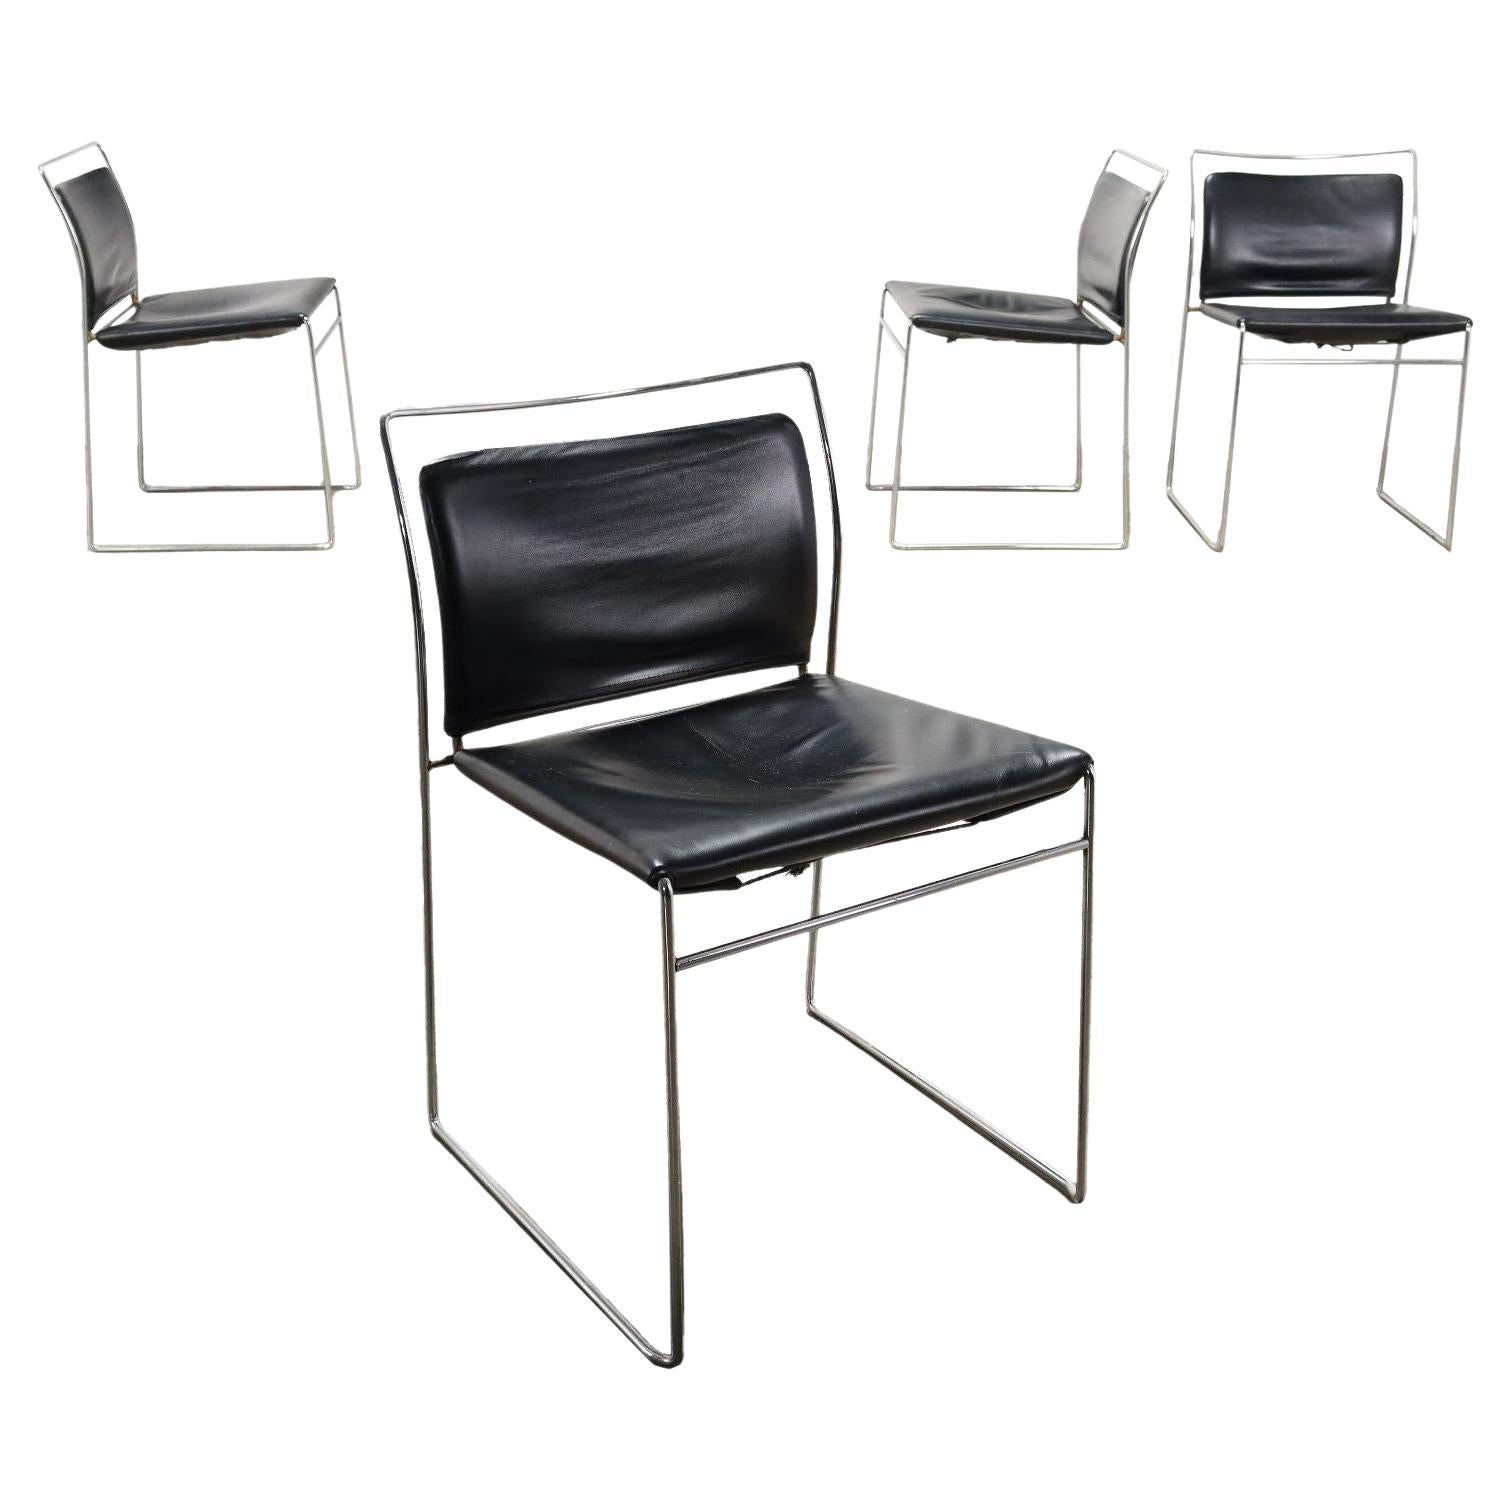 Group of 4 Chairs Simon Gavina Tulu Leather, Italy, 1960s-1970s For Sale